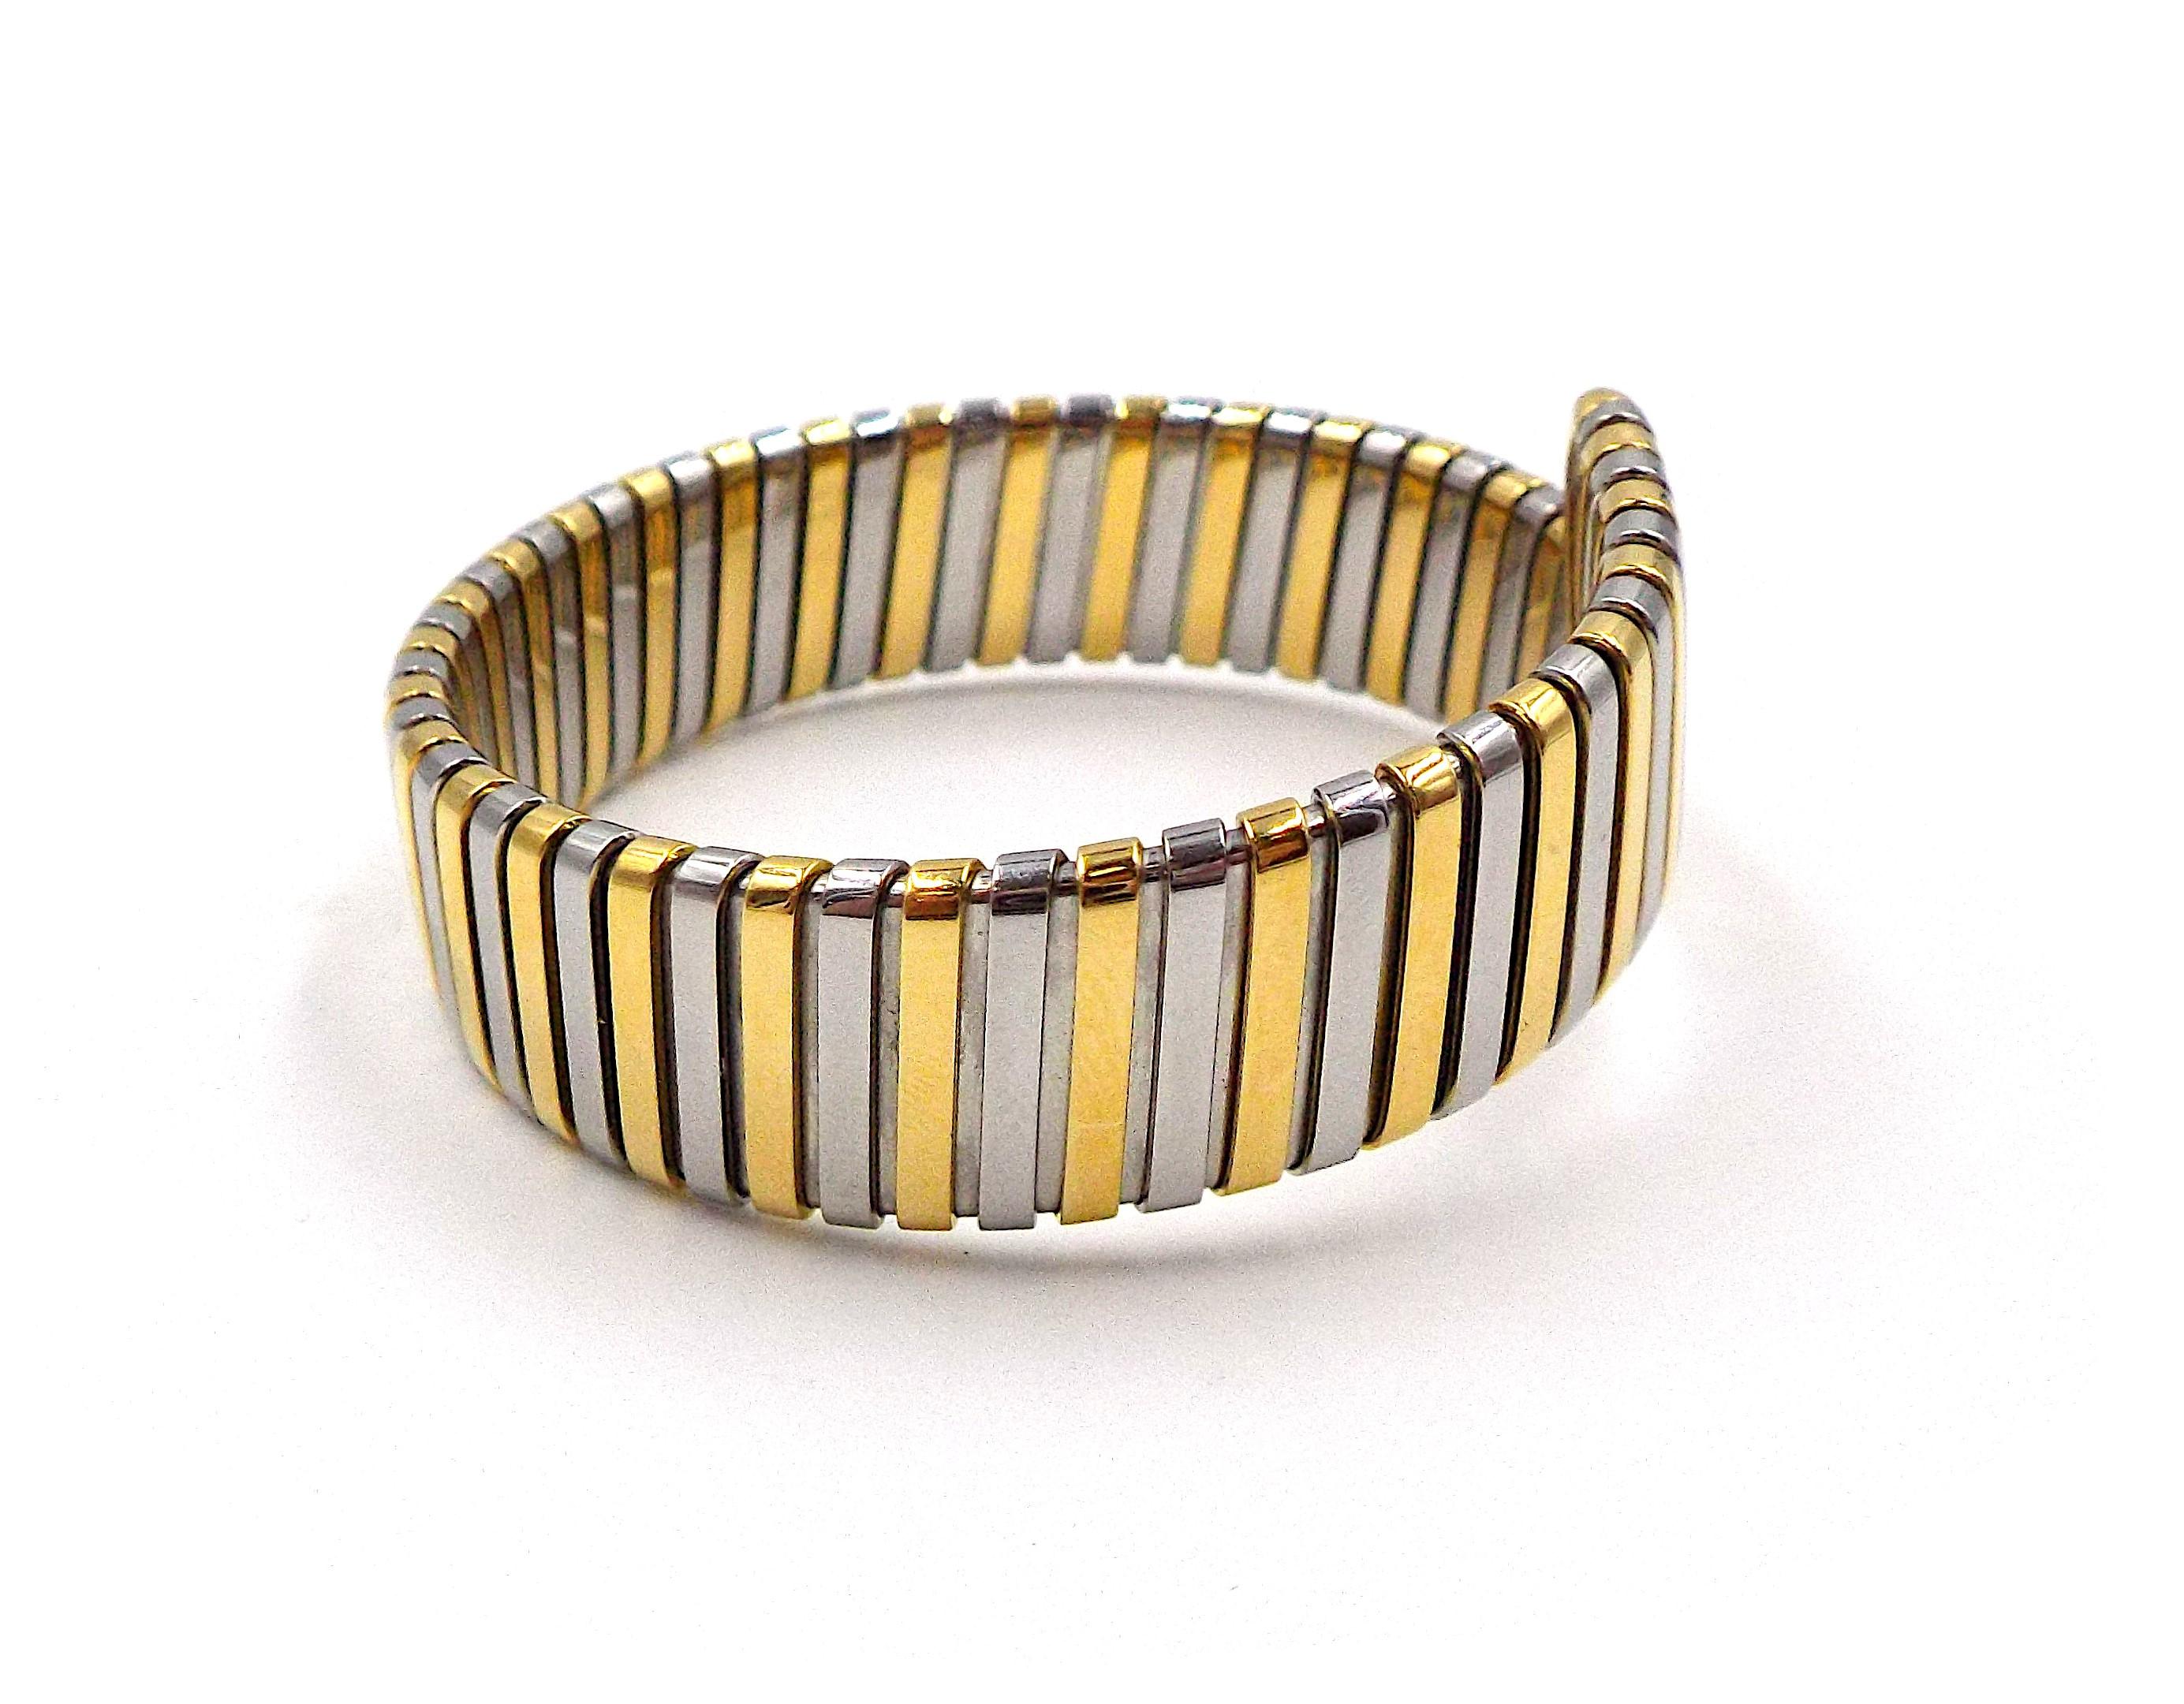 Bulgari Tubogas 18K Gold Flexible Cuff Bracelet In Good Condition For Sale In New York, NY